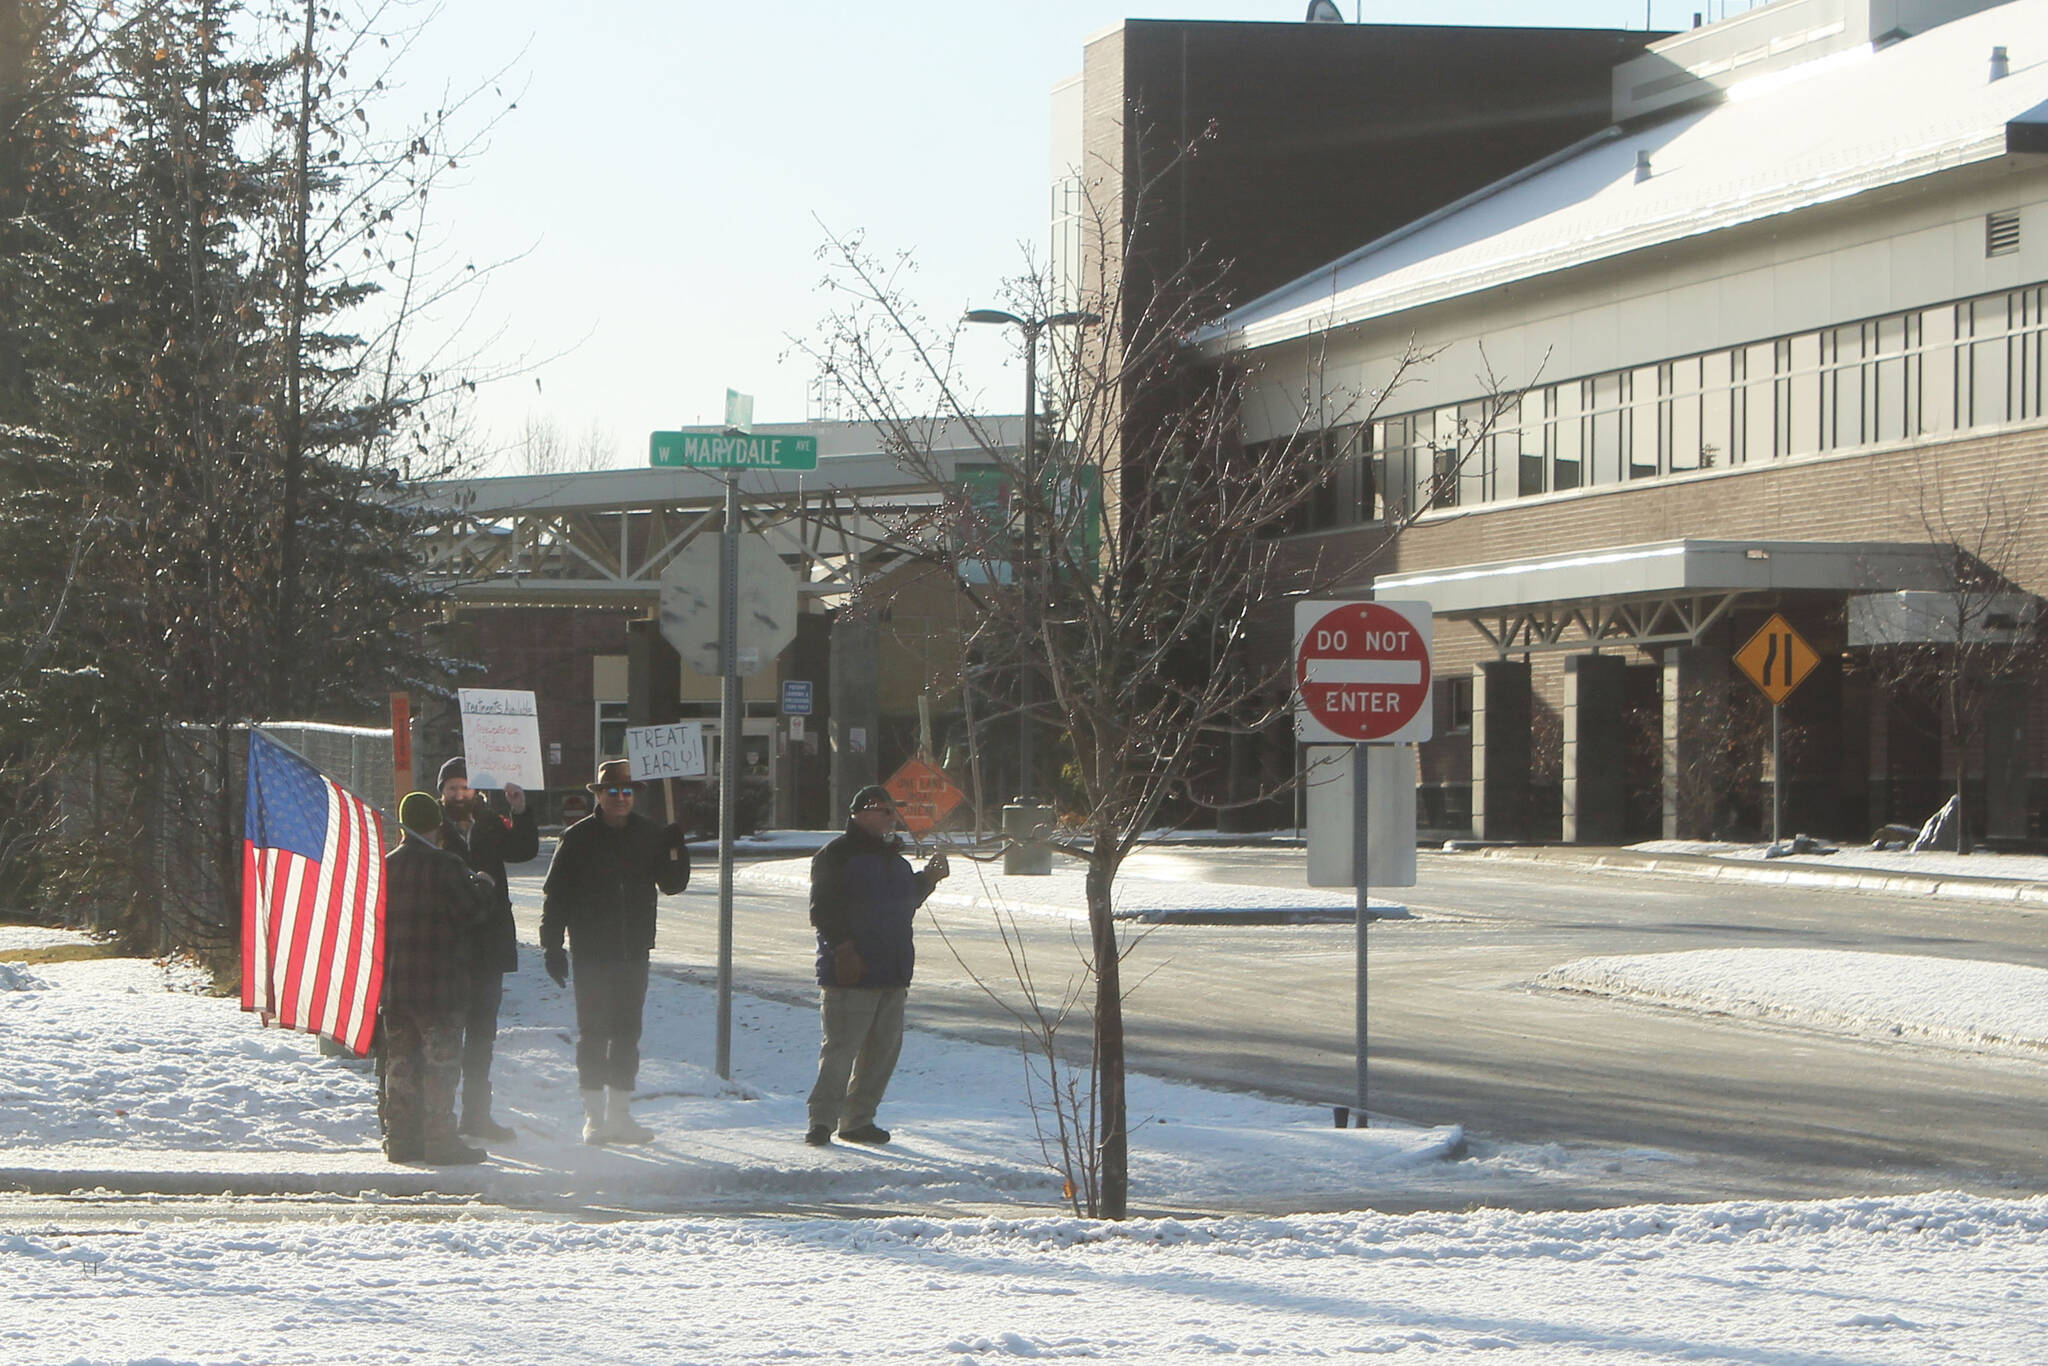 Protesters demonstrate outside of Central Peninsula Hospital on Friday, Nov. 5, 2021 in Soldotna, Alaska. The group was advocating for the use of ivermectin as a treatment option for a COVID-19 patient hospitalized at CPH. (Ashlyn O’Hara/Peninsula Clarion)